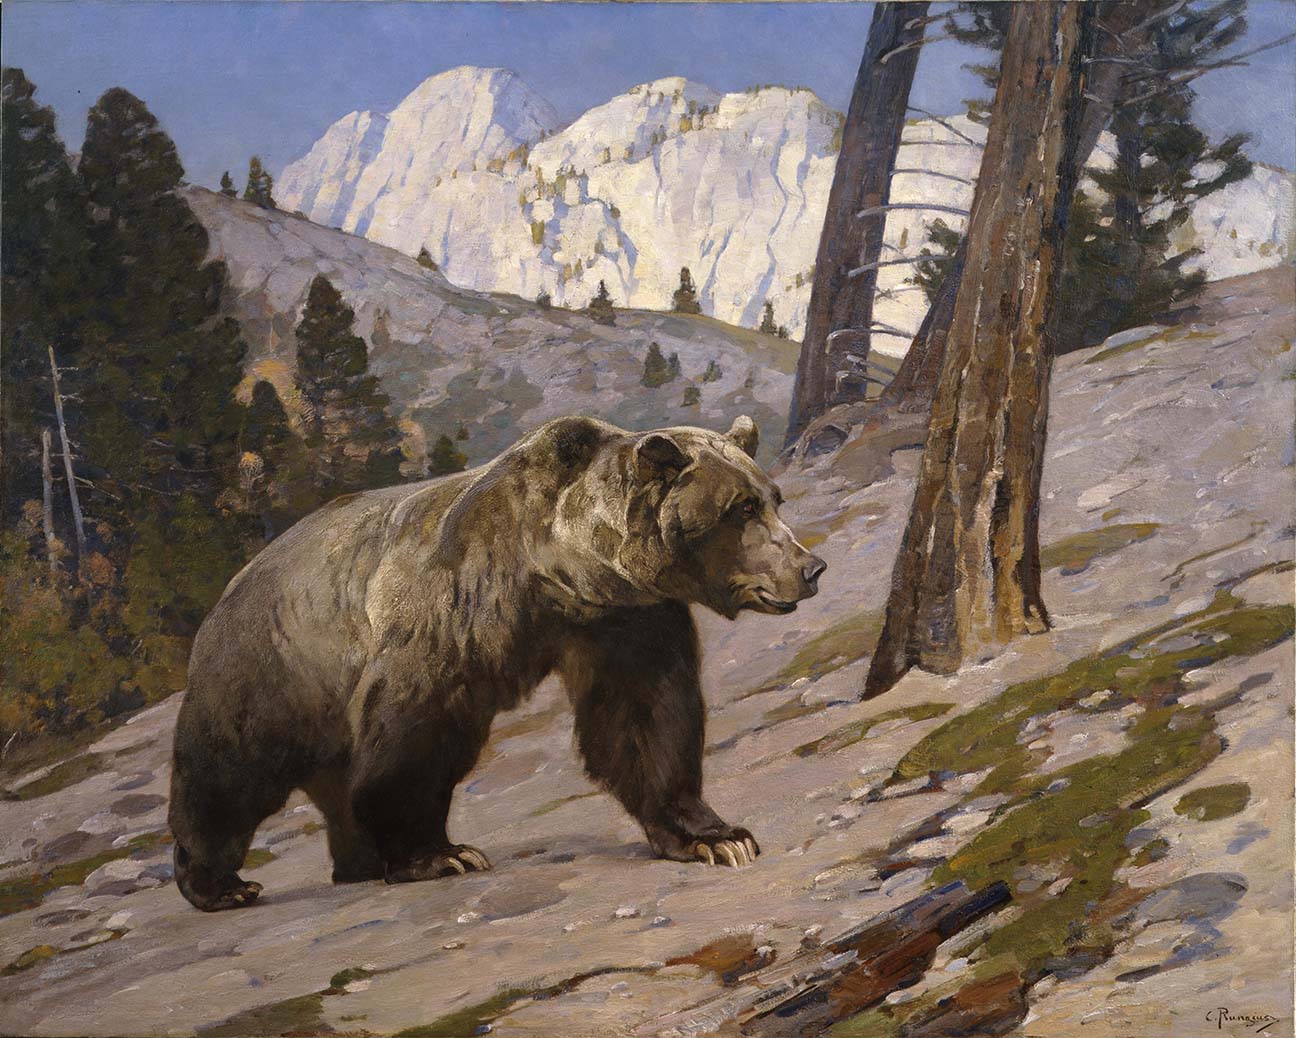 Carl Rungius (1869-1959). Silver Tip Grizzly Bear, Rocky Mountains, Alberta, ca. 1923. Oil on canvas, 60 x 75.125 inches. Gift of Jackson Hole Preserve, Inc. 16.93.4